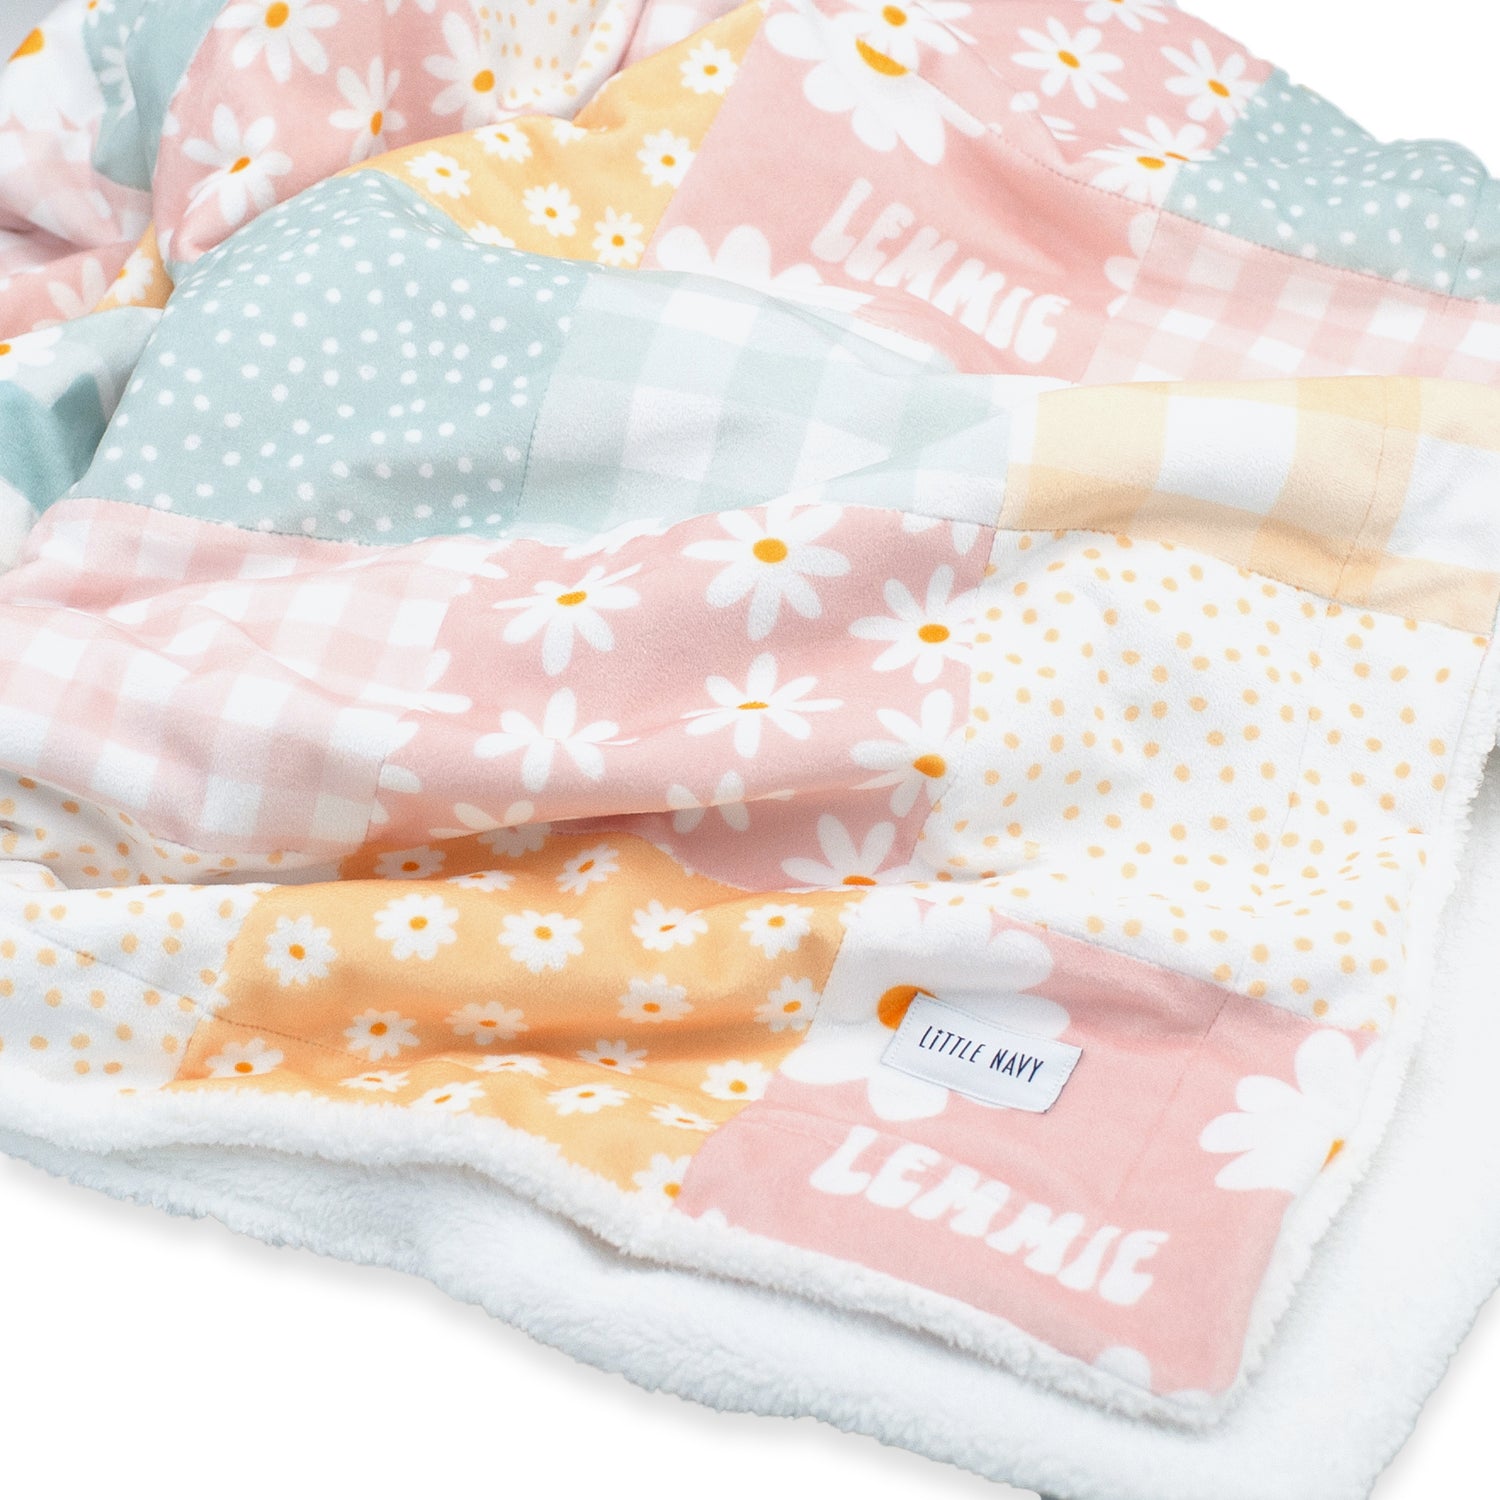 Wrap Your Little Ones in Love: The Perfect Personalized Baby Blanket